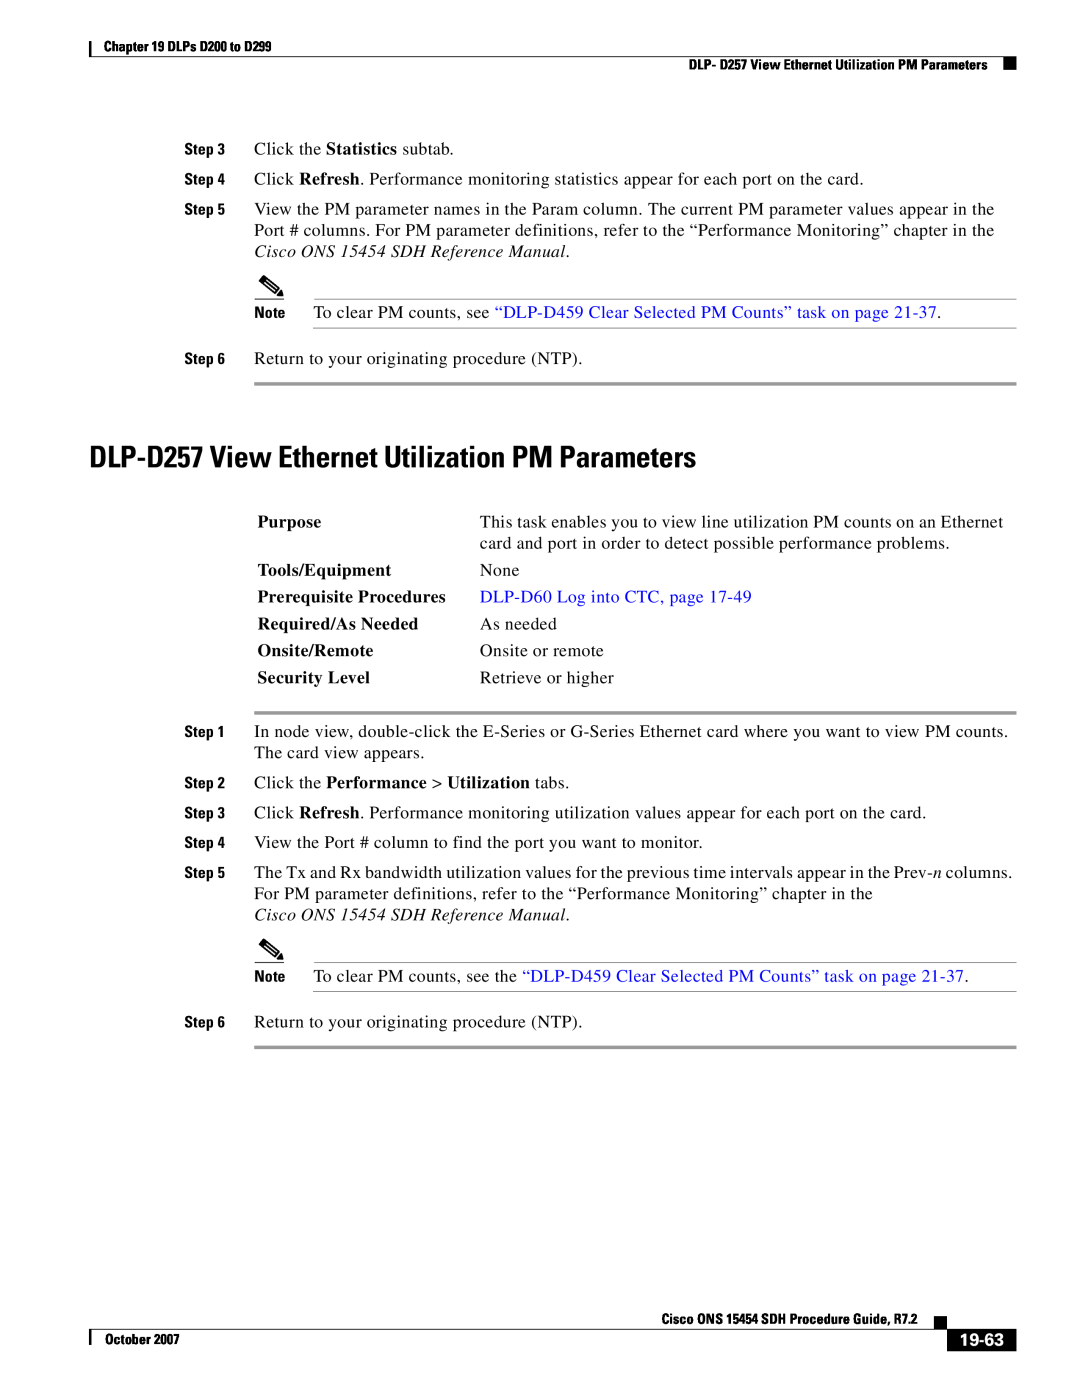 Cisco Systems D200 manual DLP-D257 View Ethernet Utilization PM Parameters, Cisco ONS 15454 SDH Reference Manual, 19-63 